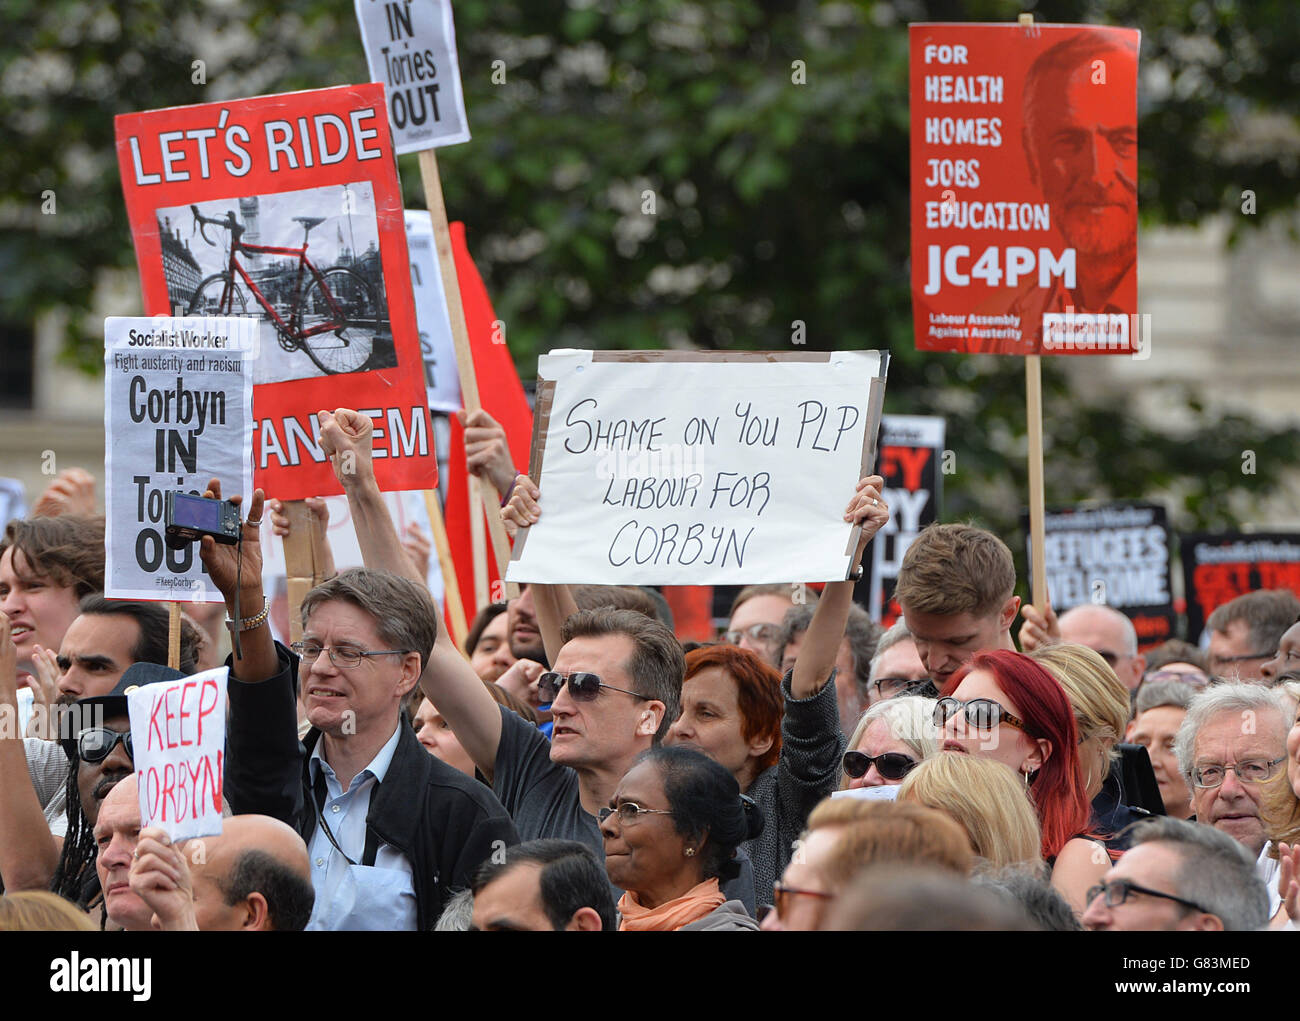 The Momentum campaign group holds a 'Keep Corbyn' demonstration outside the Houses of Parliament in London, at the same time as the Parliamentary Labour Party is due to meet inside. Stock Photo